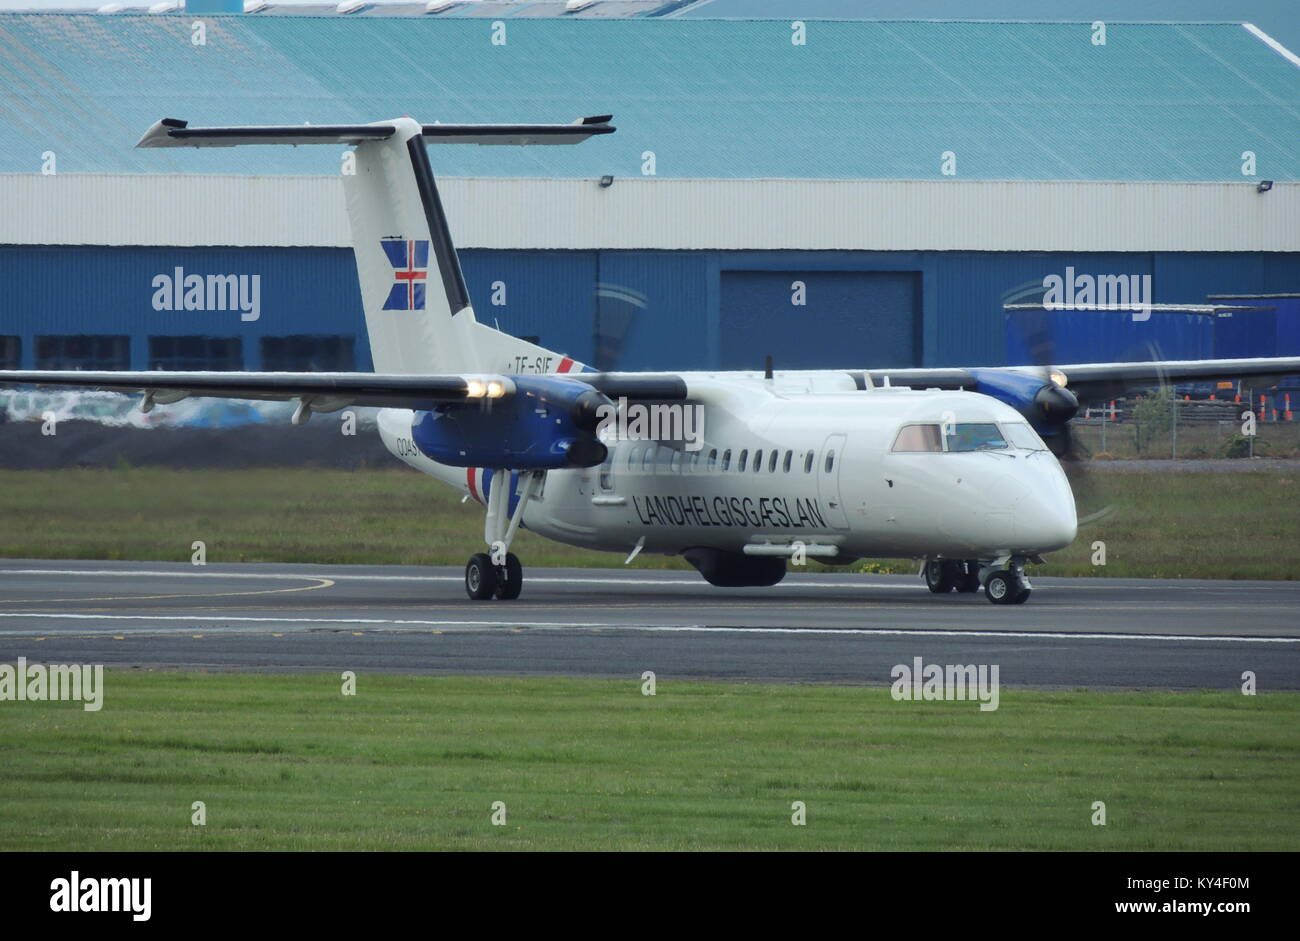 TF-SIF, a de Havilland Canada DHC-8 (Dash 8) operated by Icelandic Coast Guard, at Prestwick Airport in Ayrshire. Stock Photo